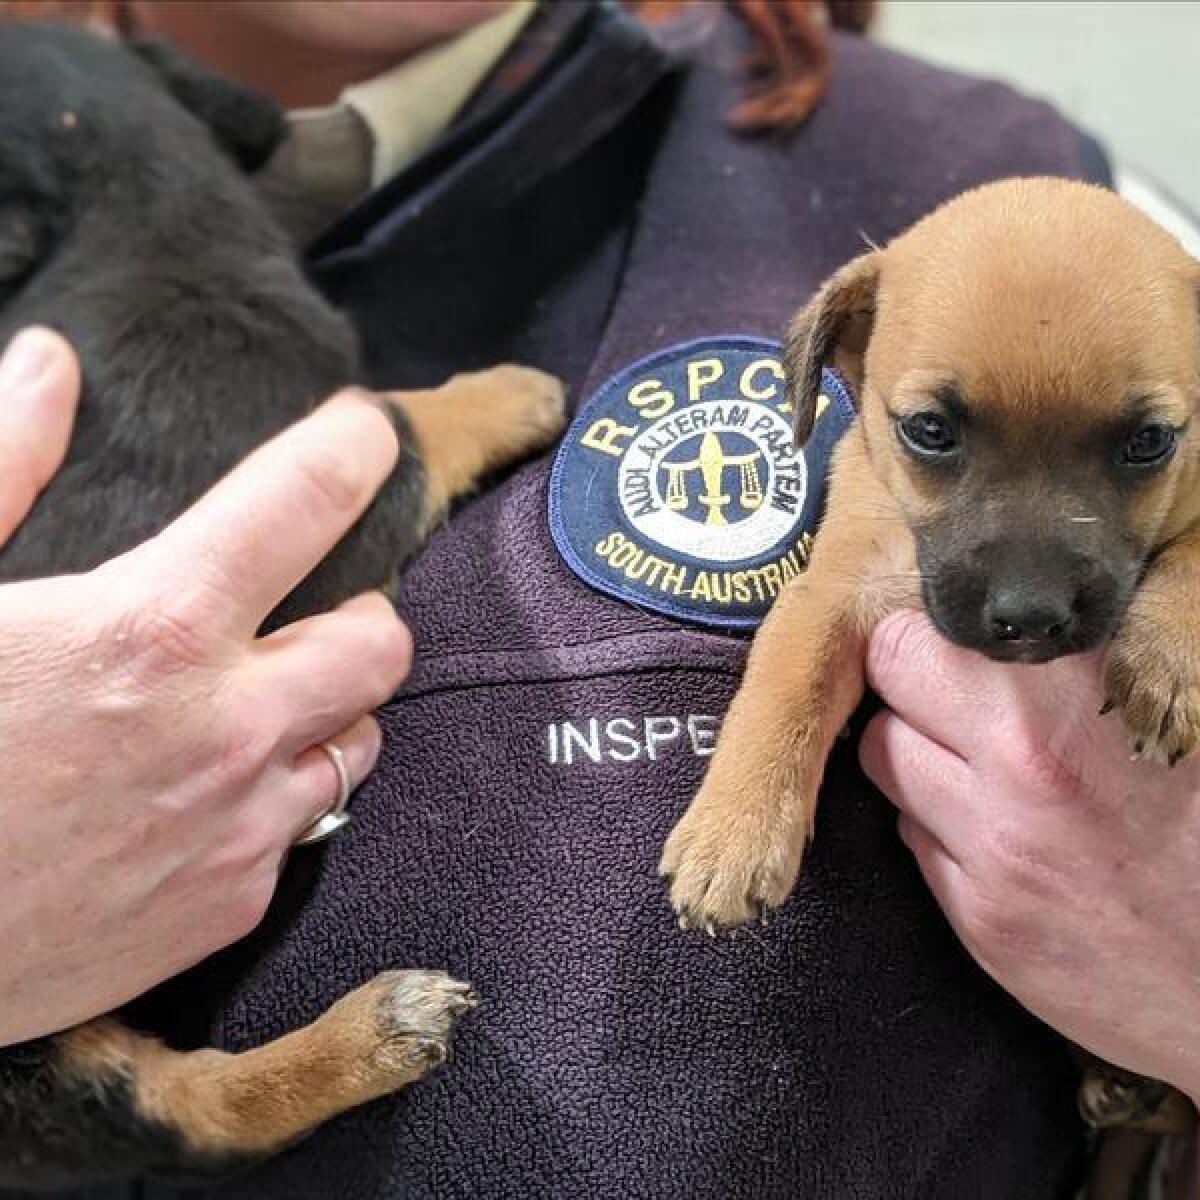 An RSPCA officer with dumped puppies in South Australia